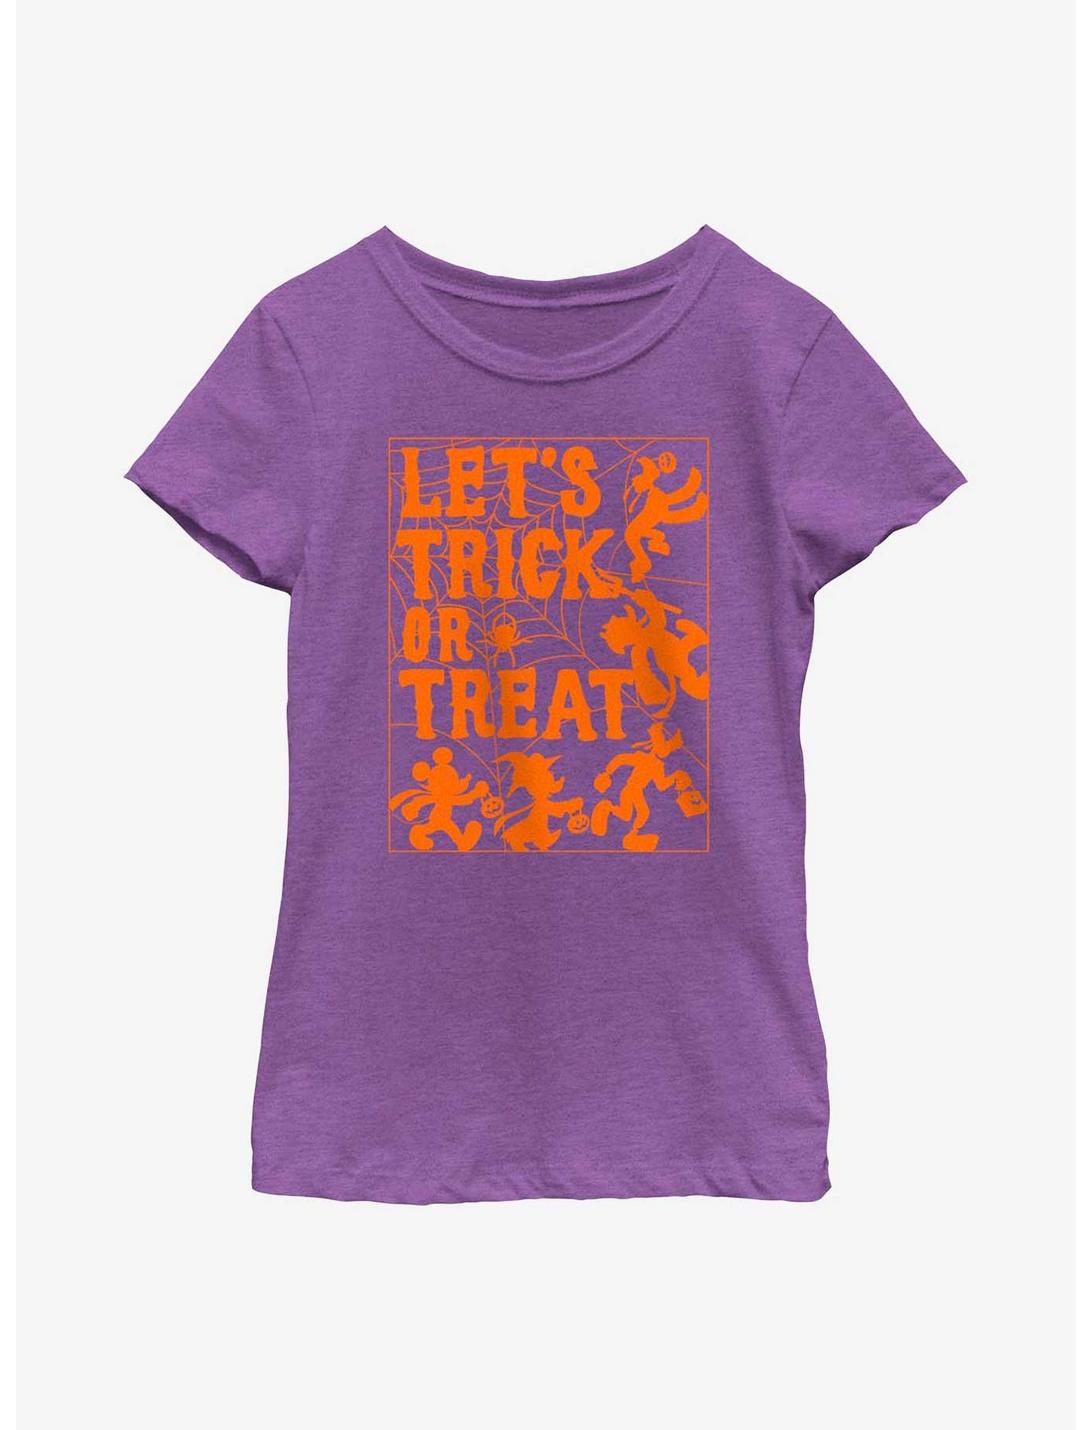 Plus Size Disney Mickey Mouse Let's Trick Or Treat Youth Girls T-Shirt, PURPLE BERRY, hi-res